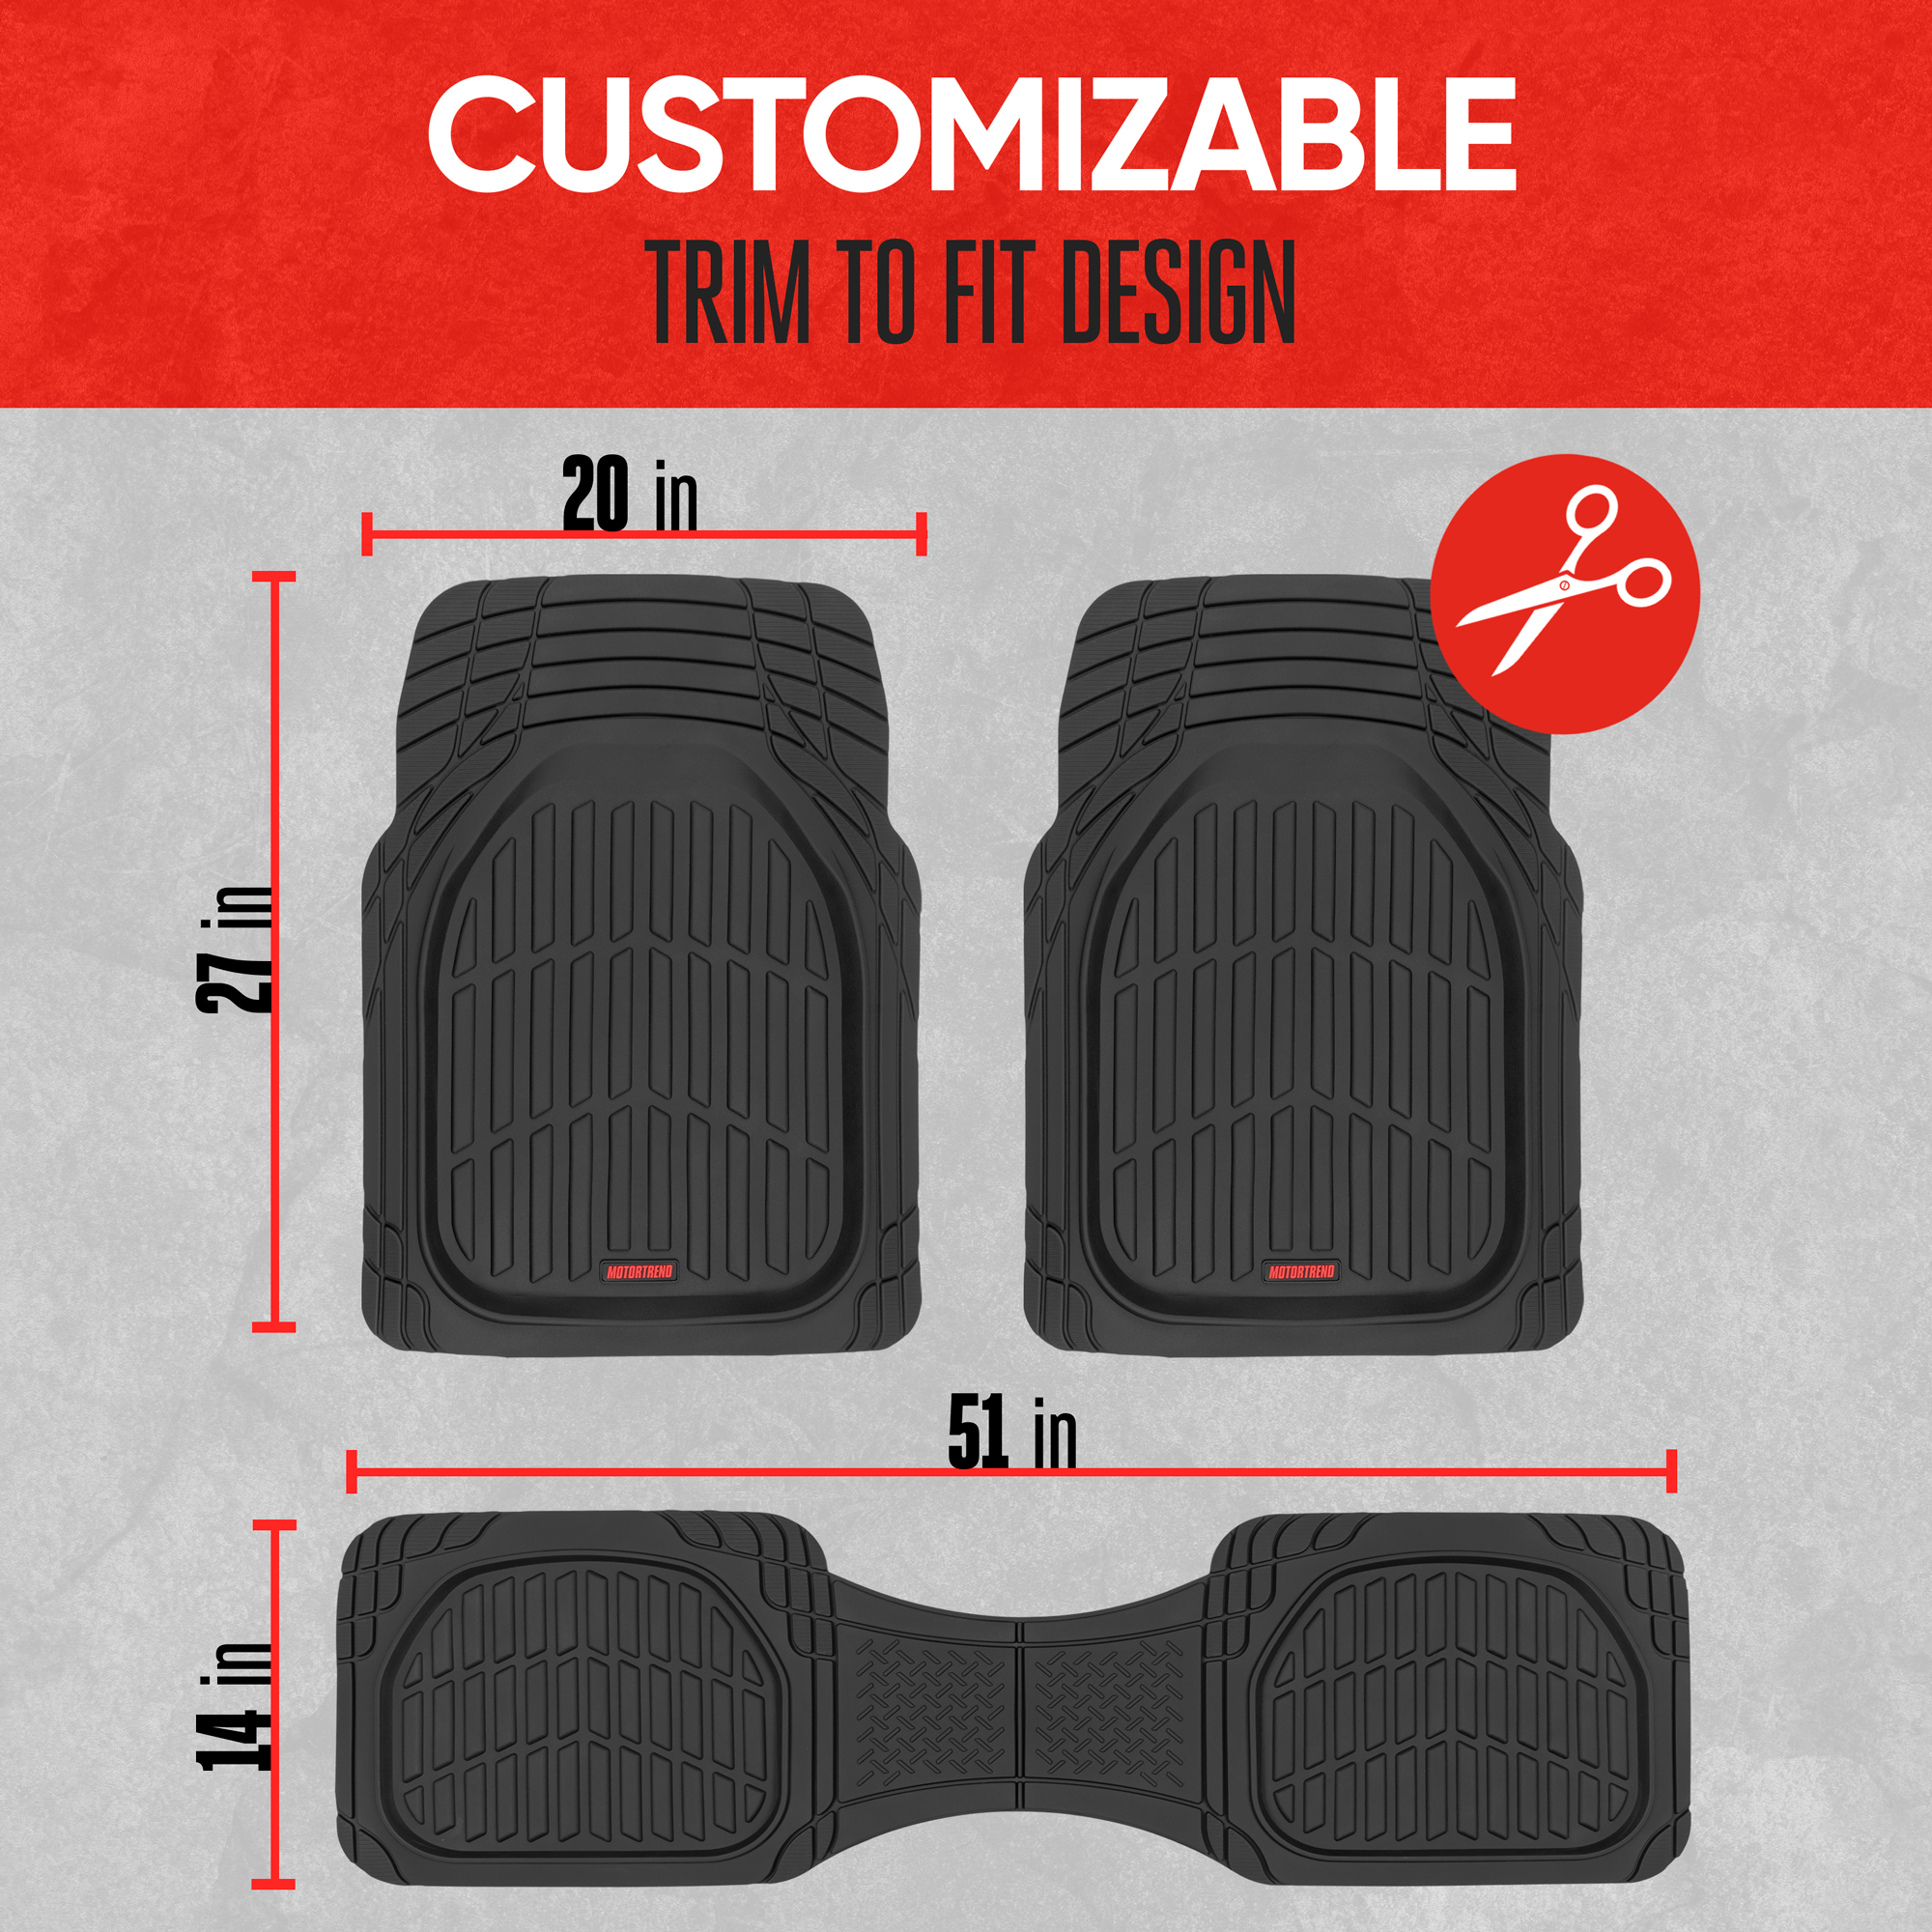 Motor Trend FlexTough Car Floor Mats Contour Liners Heavy Duty Deep Dish  Rubber Mats for Car  SUV, (Odorless) Fits select: 1975-2022 FORD F150,  1999-2022 CHEVROLET SILVERADO